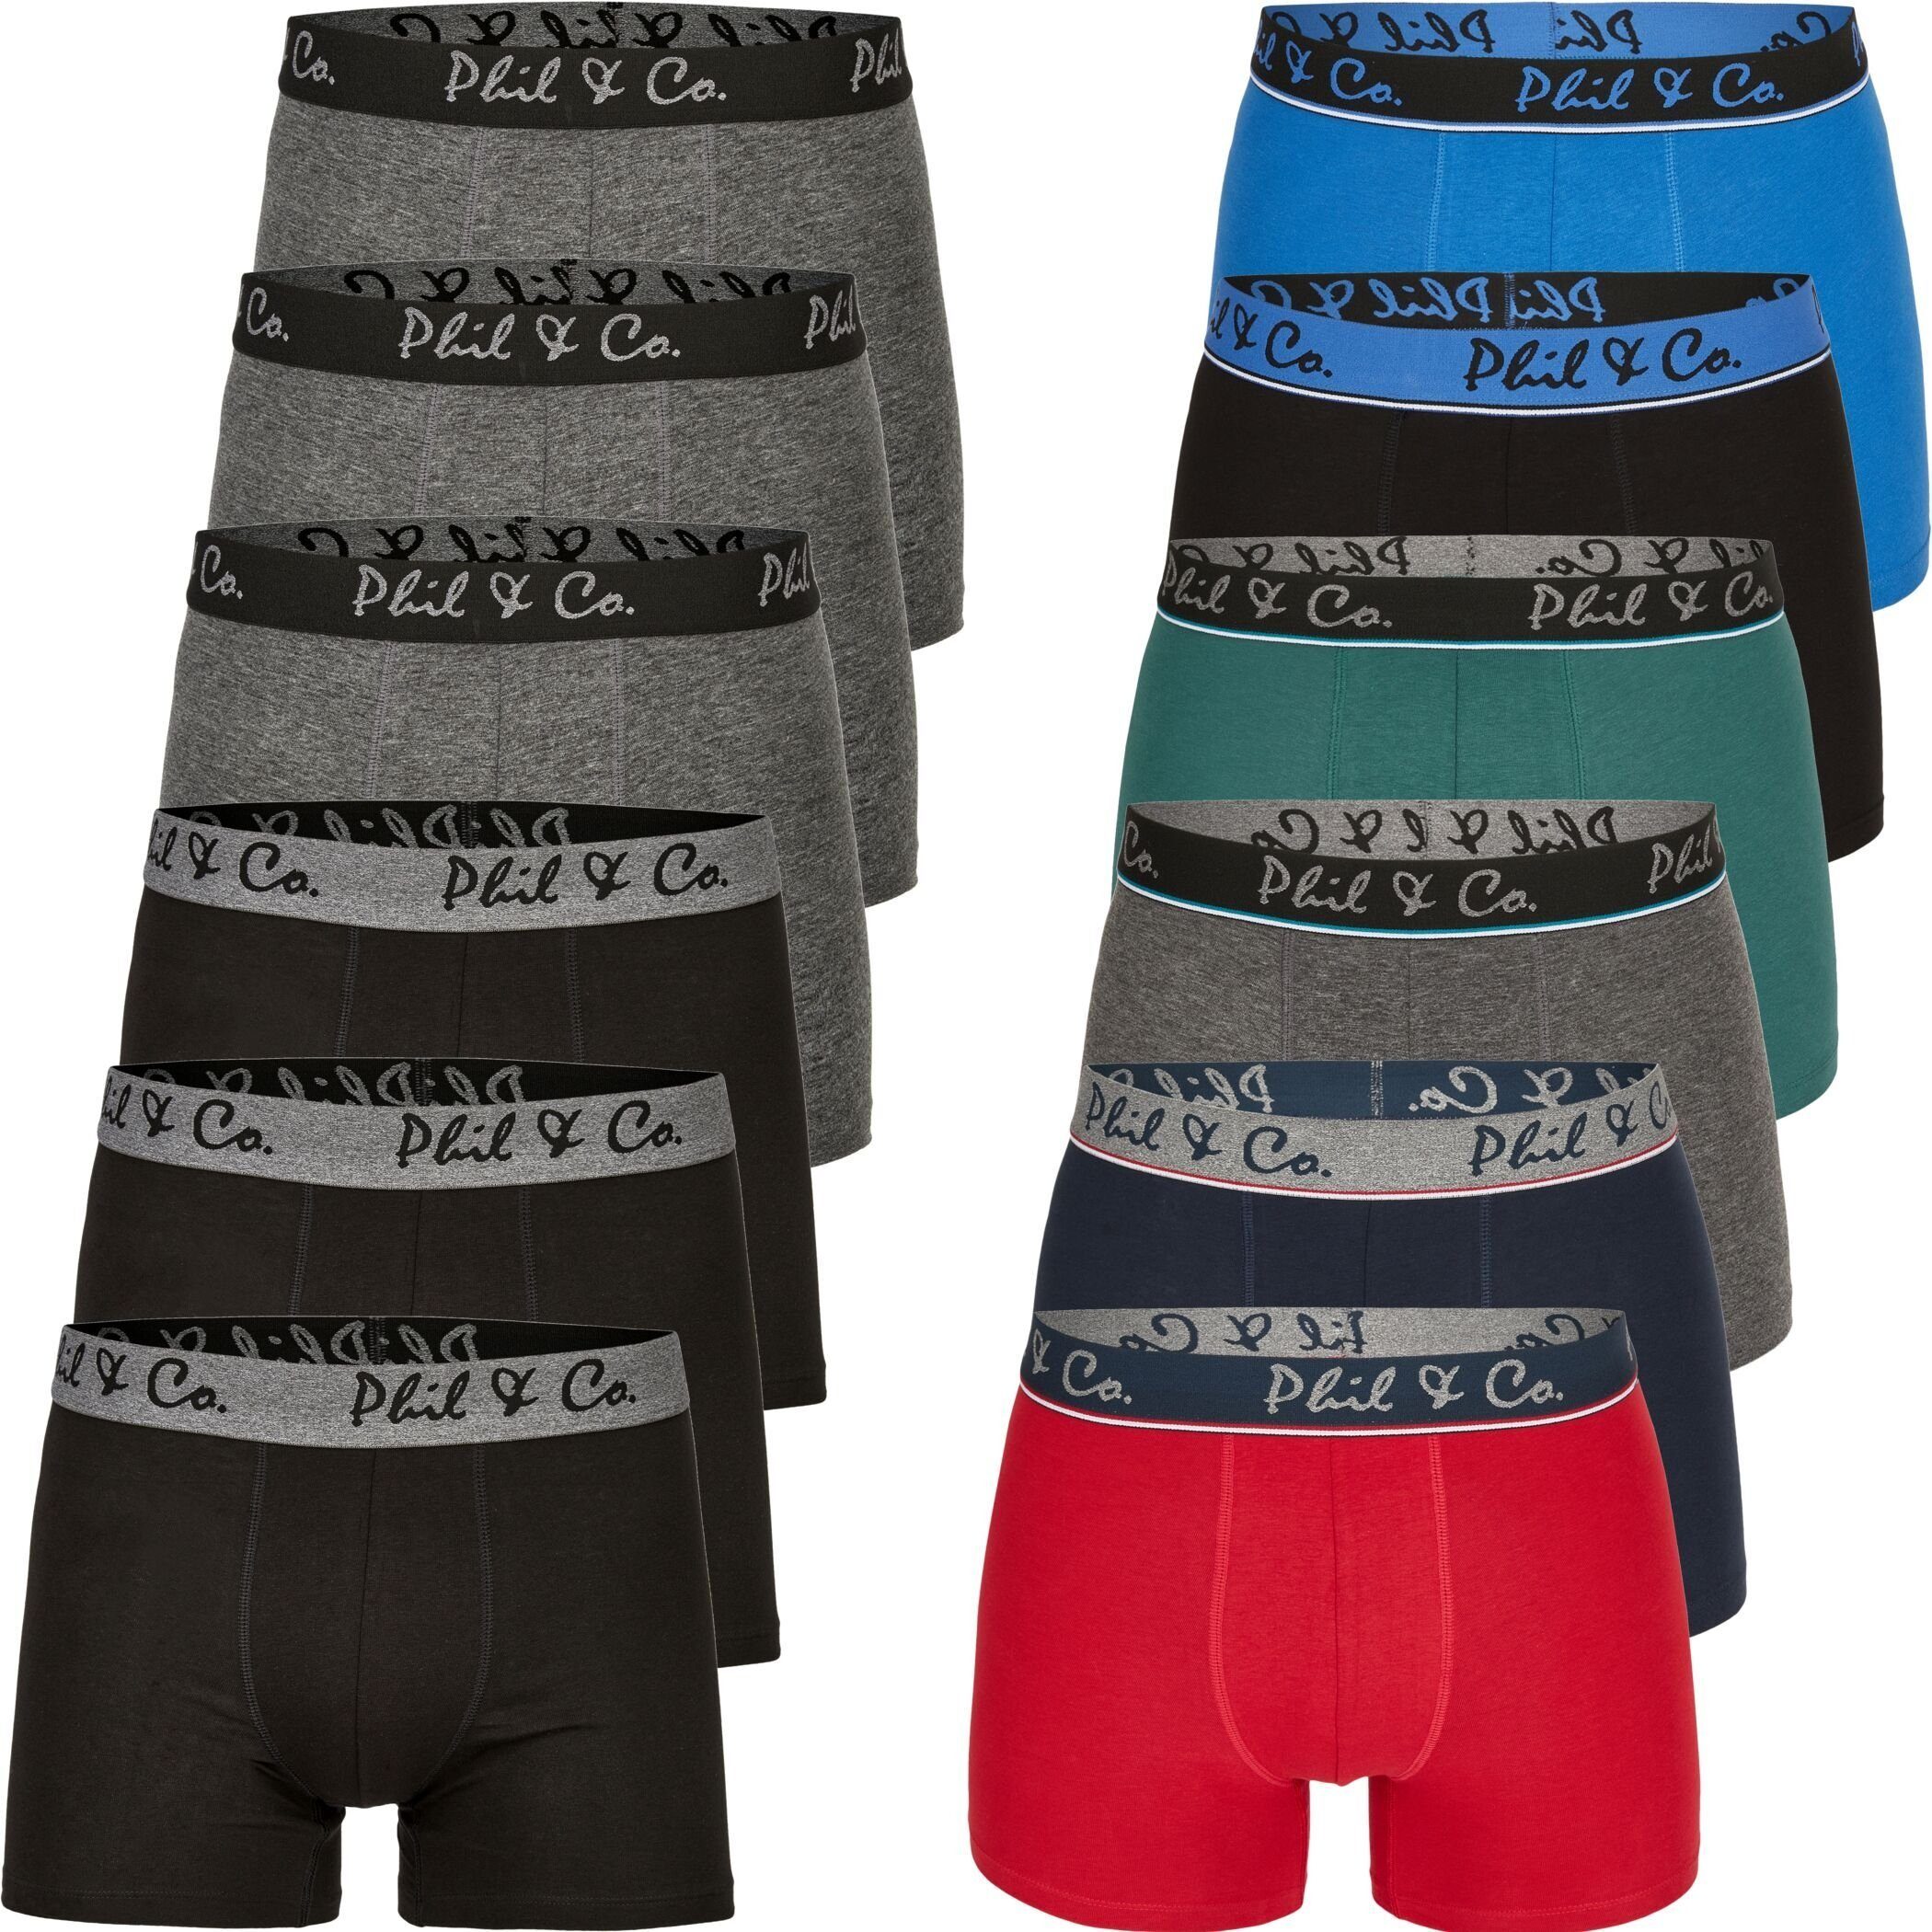 Phil & Co. Boxershorts 12 & (1-St) Short Berlin DESIGN 05 Phil Boxershorts FARBWAHL Co Trunk Jersey Pant Pack